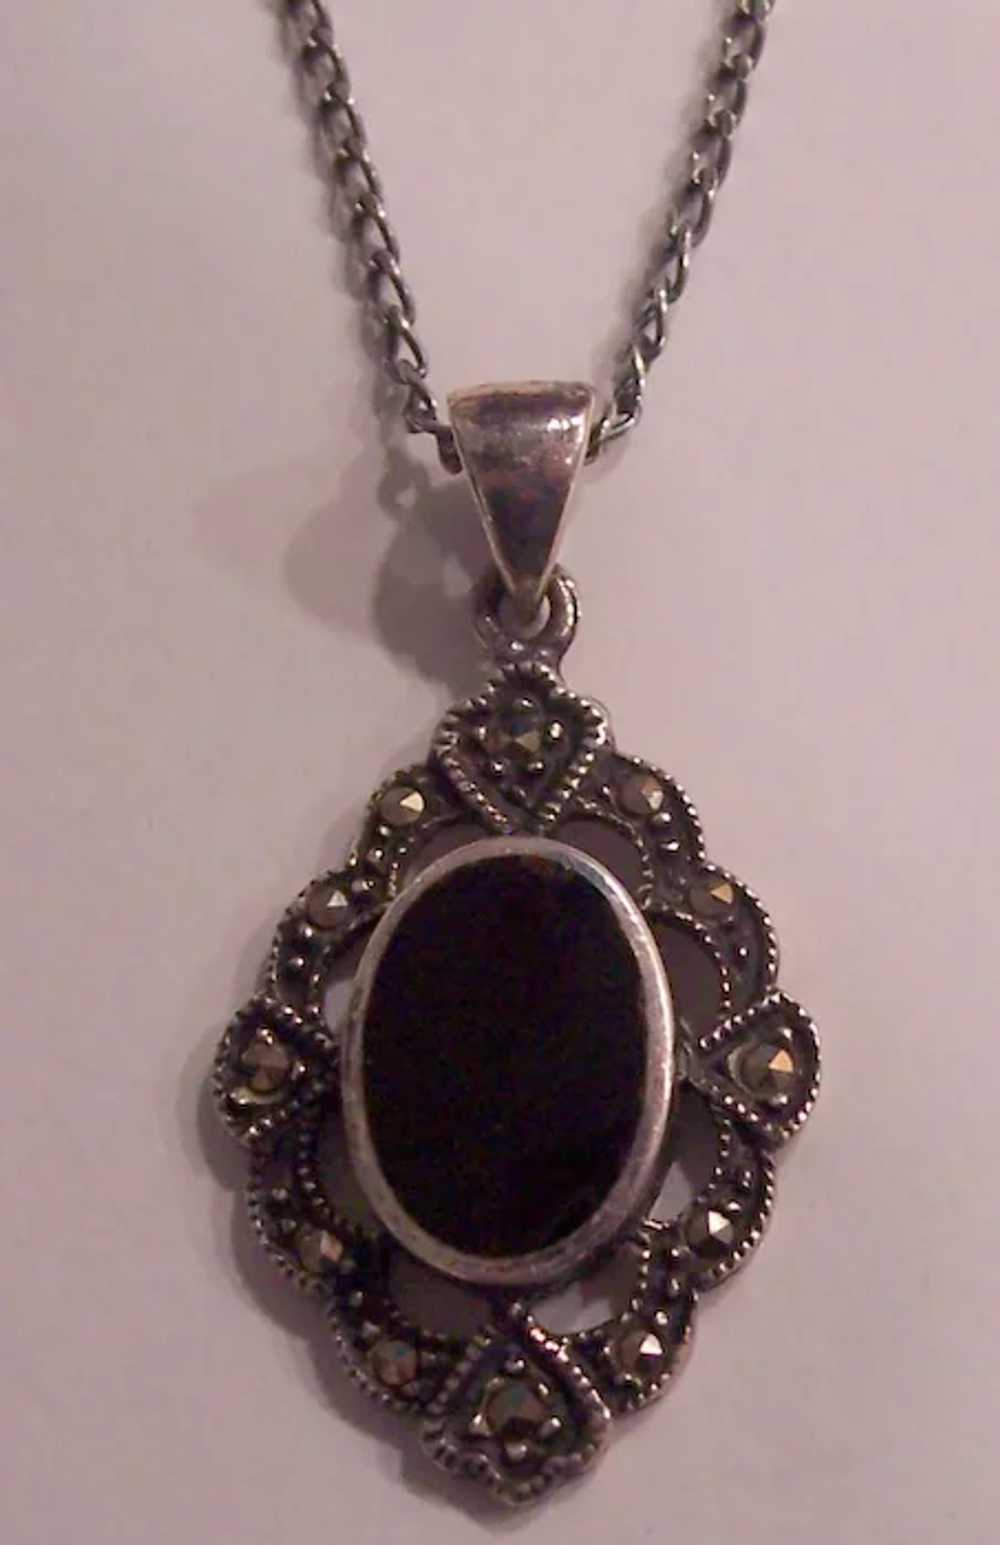 Sterling Silver Marcasite Onyx Pendant Necklace - image 2